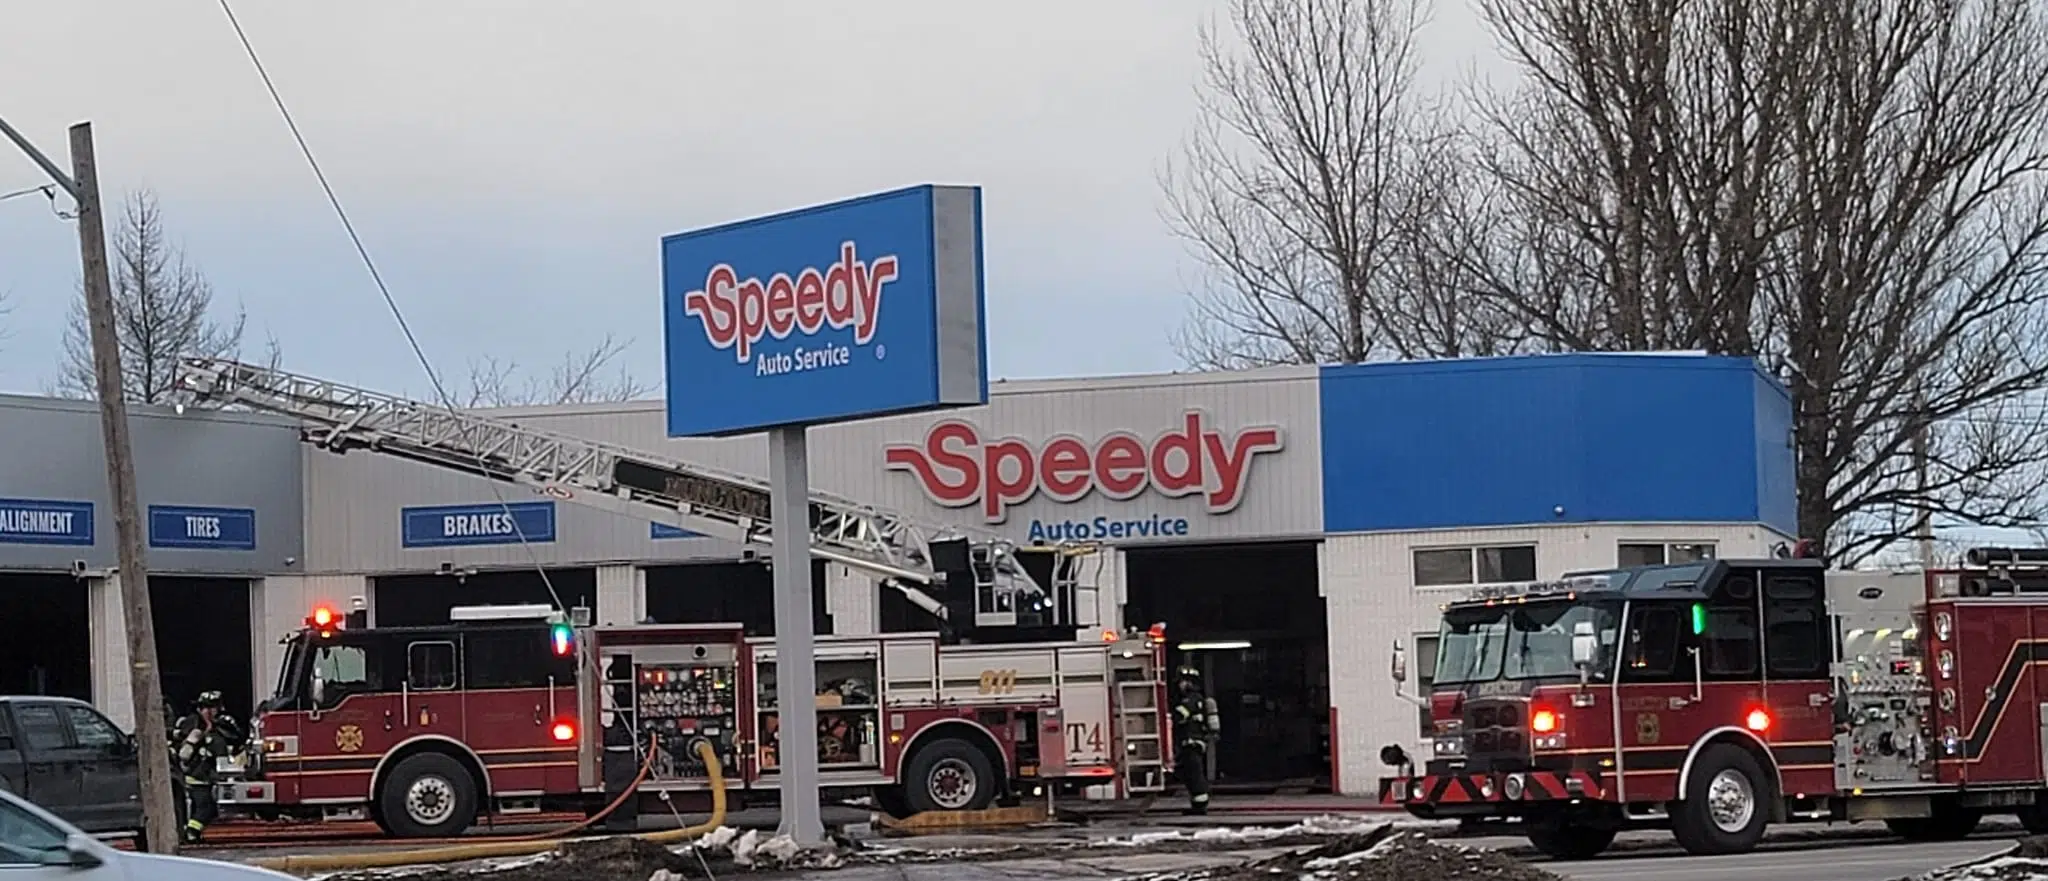 Two separate fires damage trucks, vehicle and business